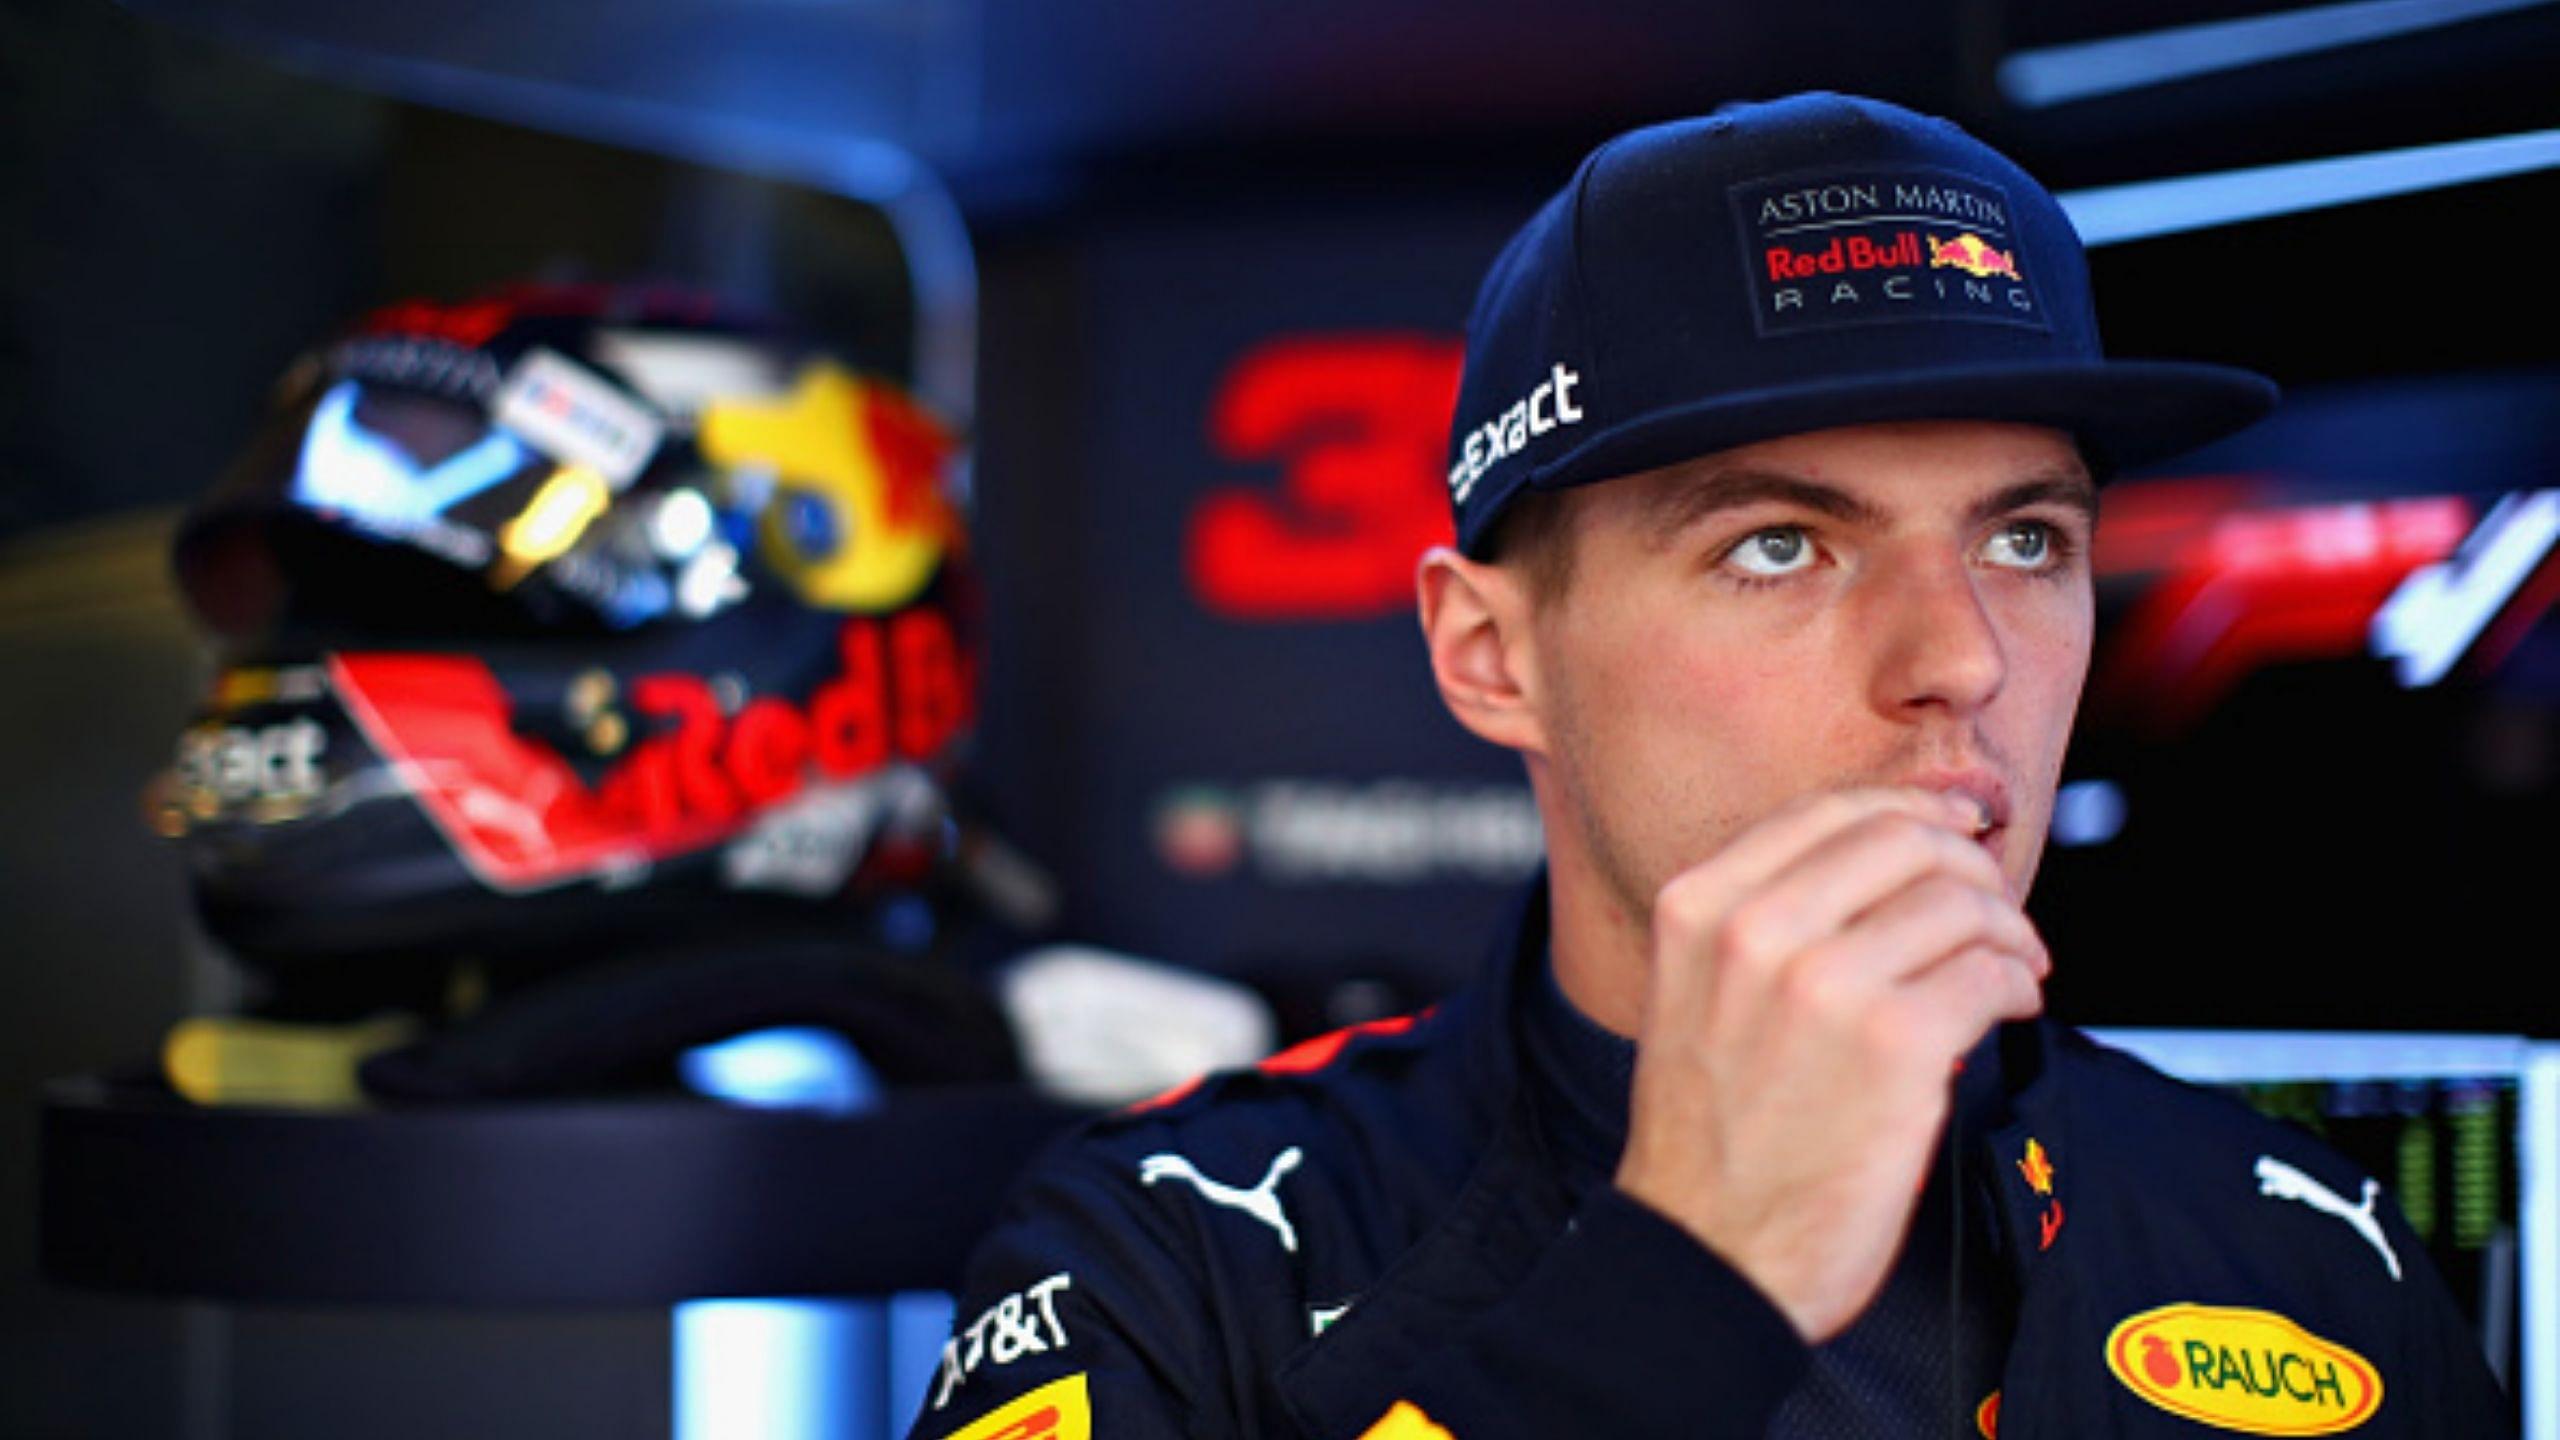 Max Verstappen: Mongolian government registers official complaint with UN against Red Bull driver's 'mongol' comments at Portuguese GP